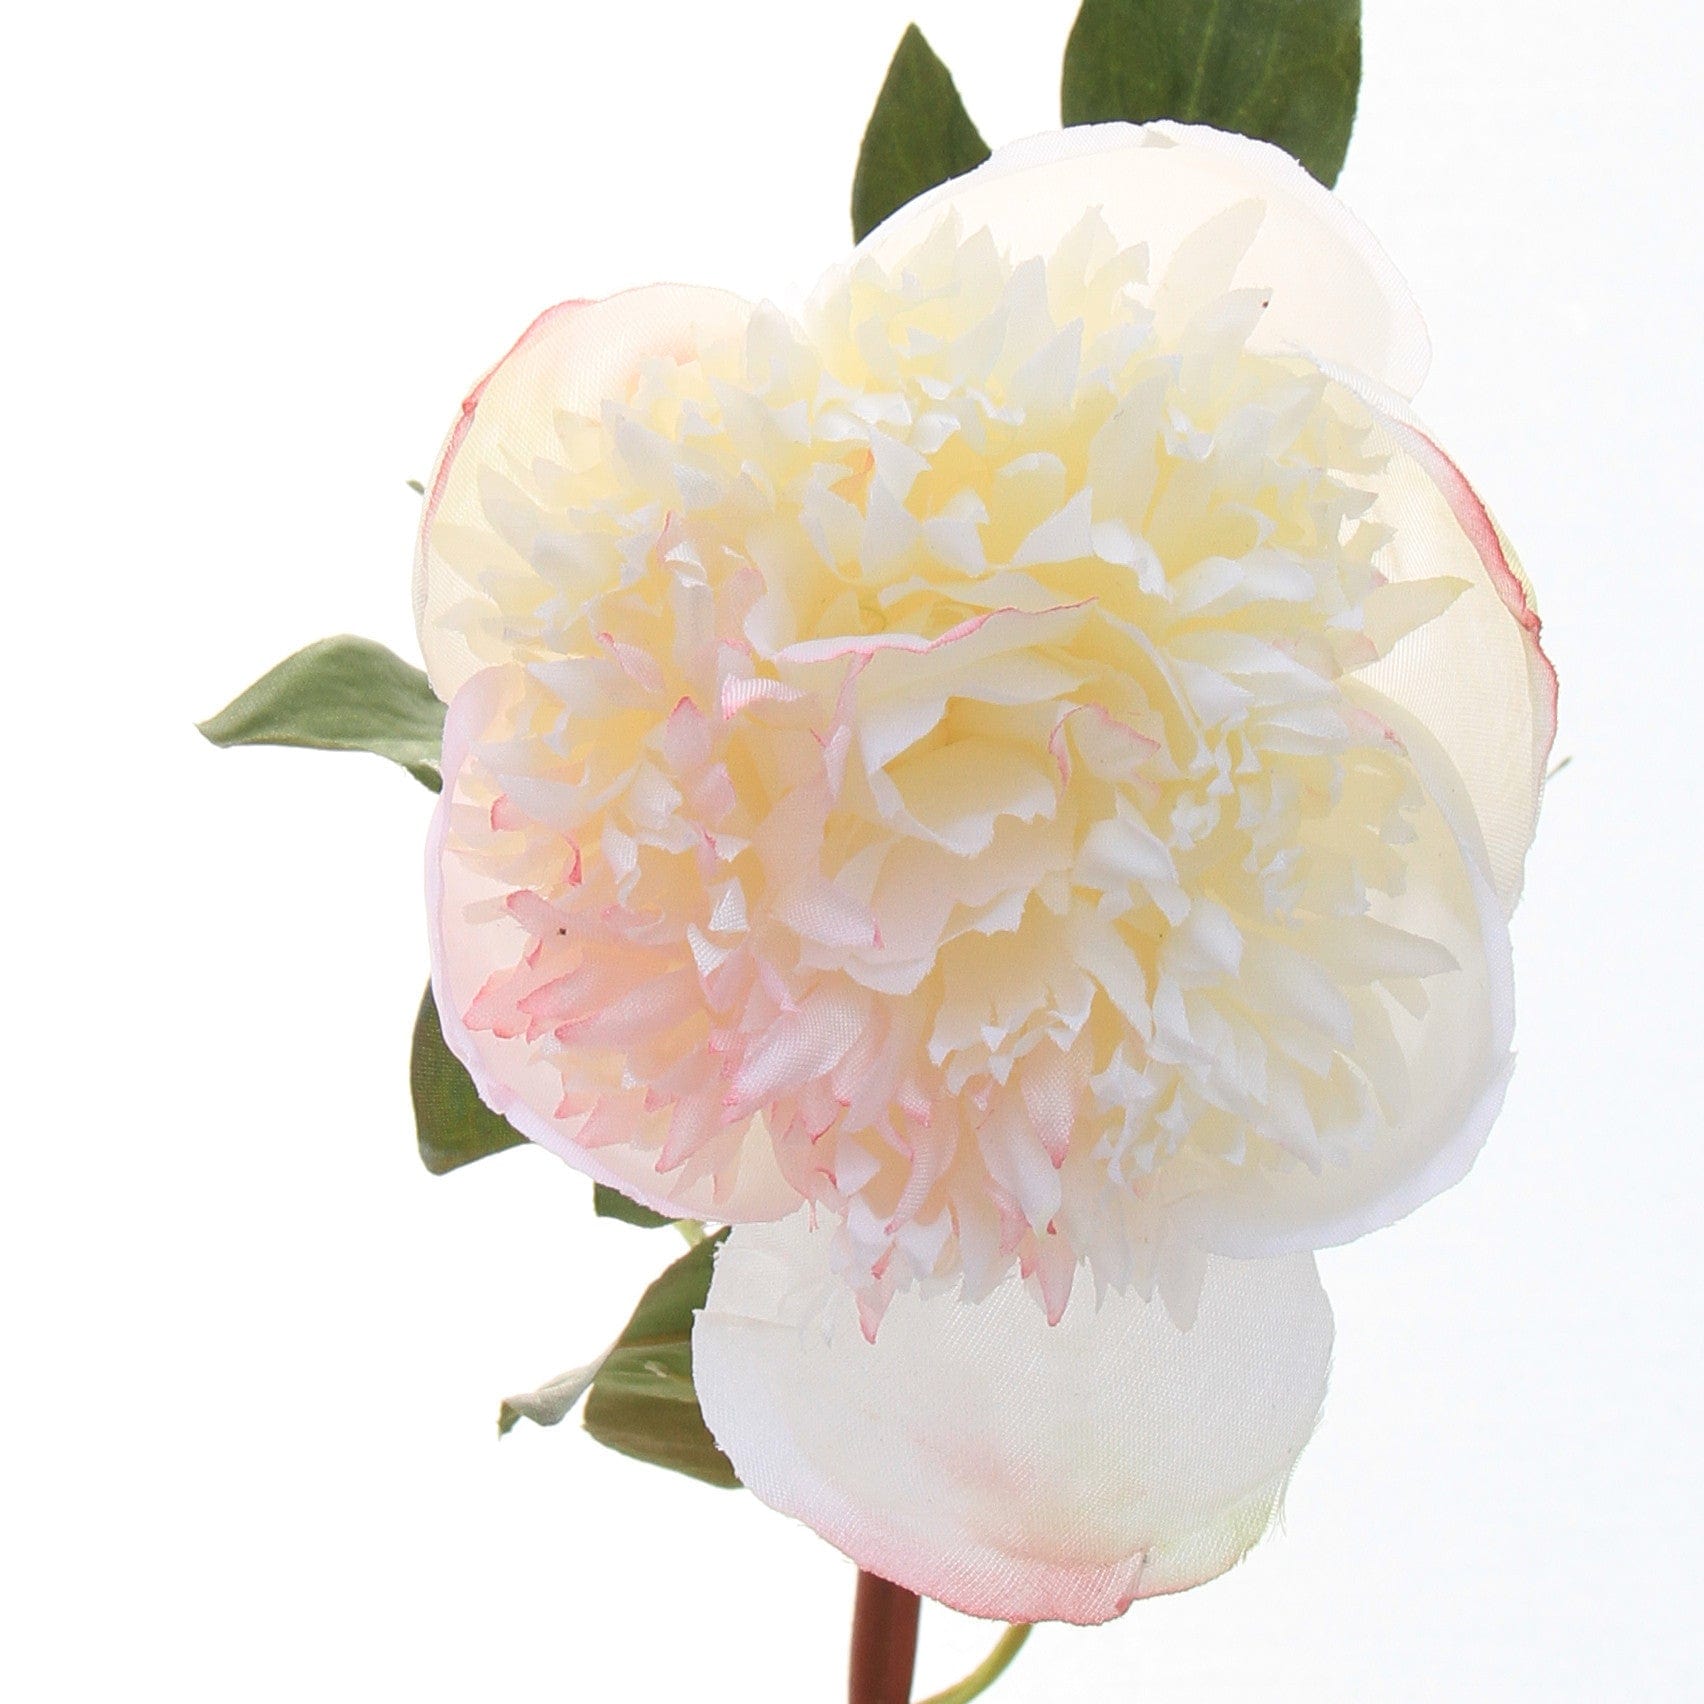 luxury artificial fake silk flowers white pink open peony lifelike realistic faux flowers buy online from Amaranthine Blooms UK